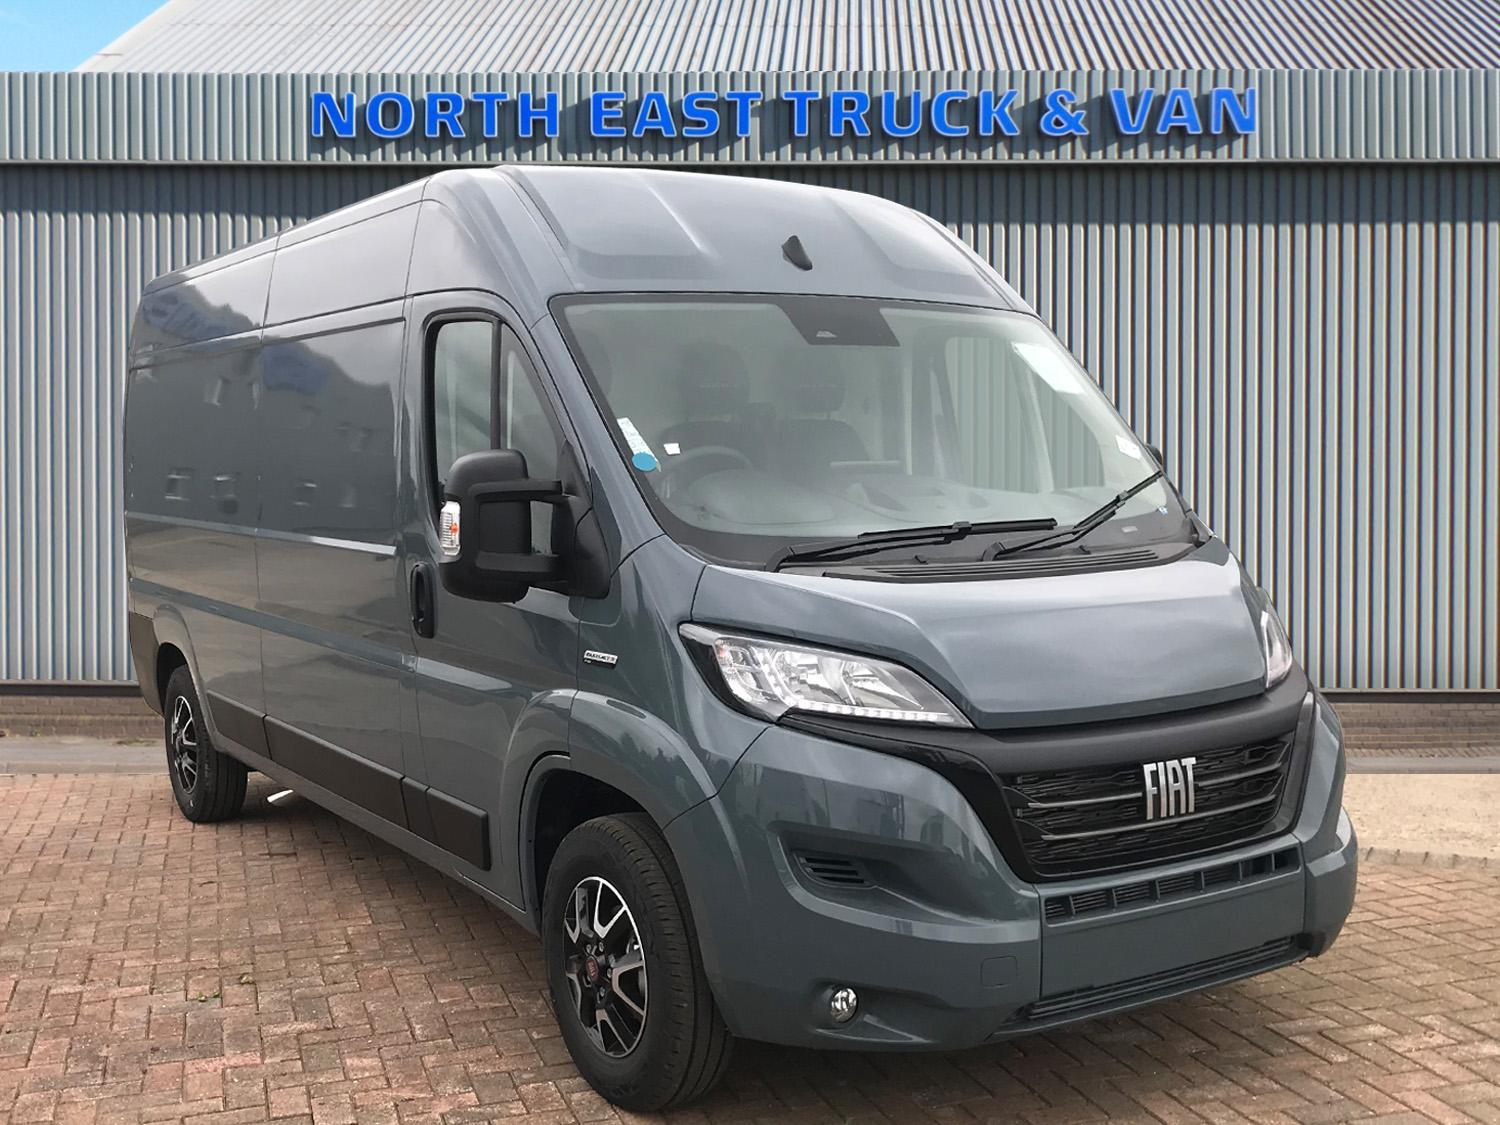 New Fiat Ducato MY22 model arrives at North East Truck and Van